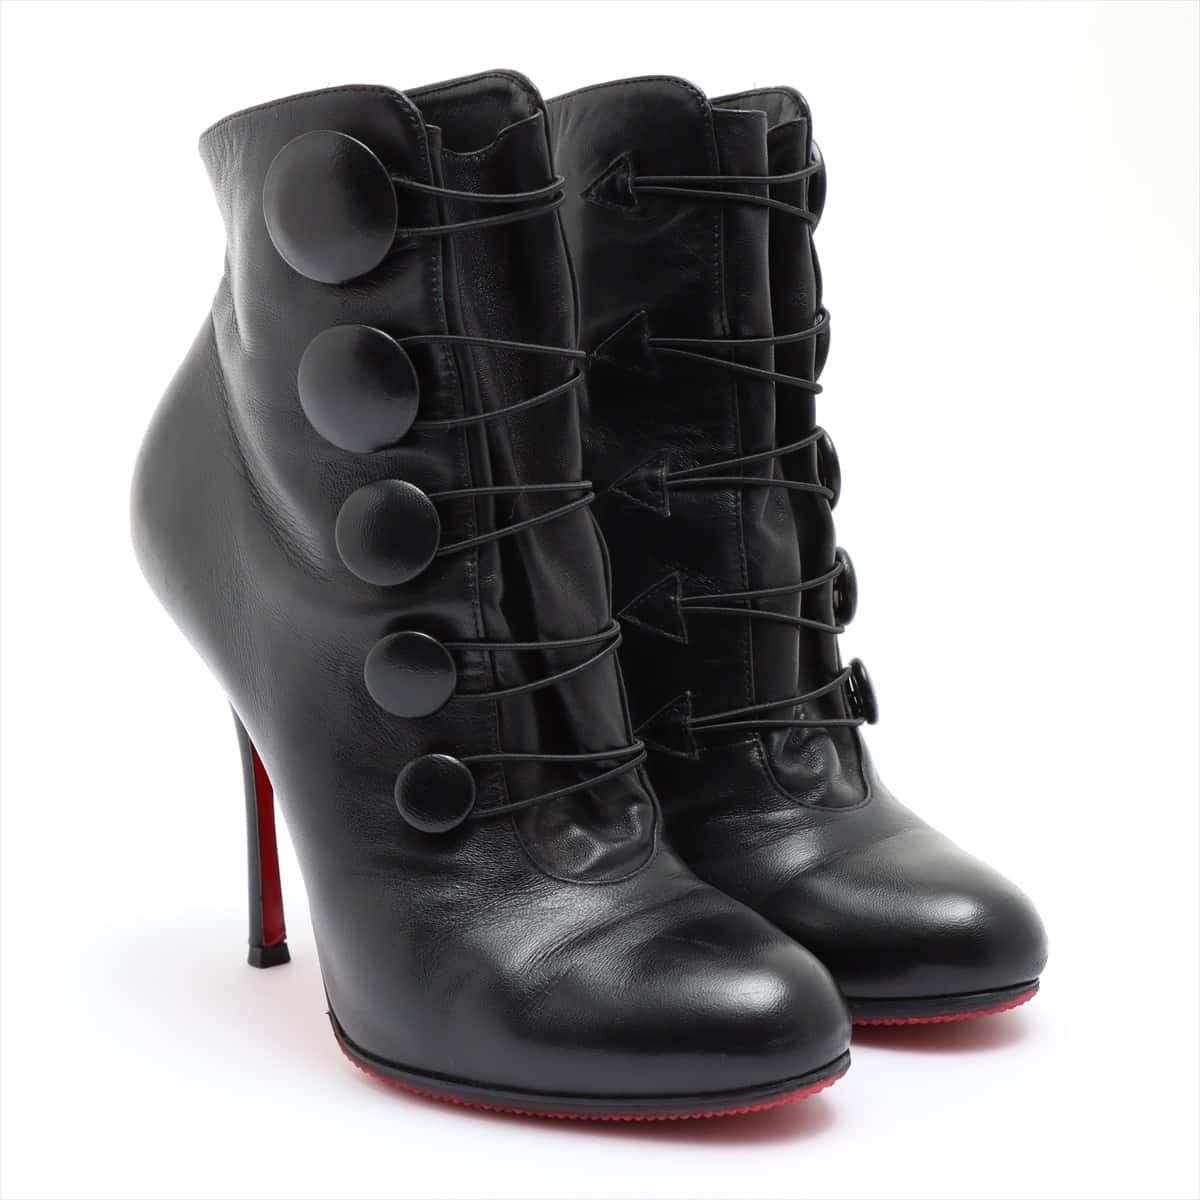 Christian Louboutin Leather Boots 37.5 Ladies' Black Has half rubber